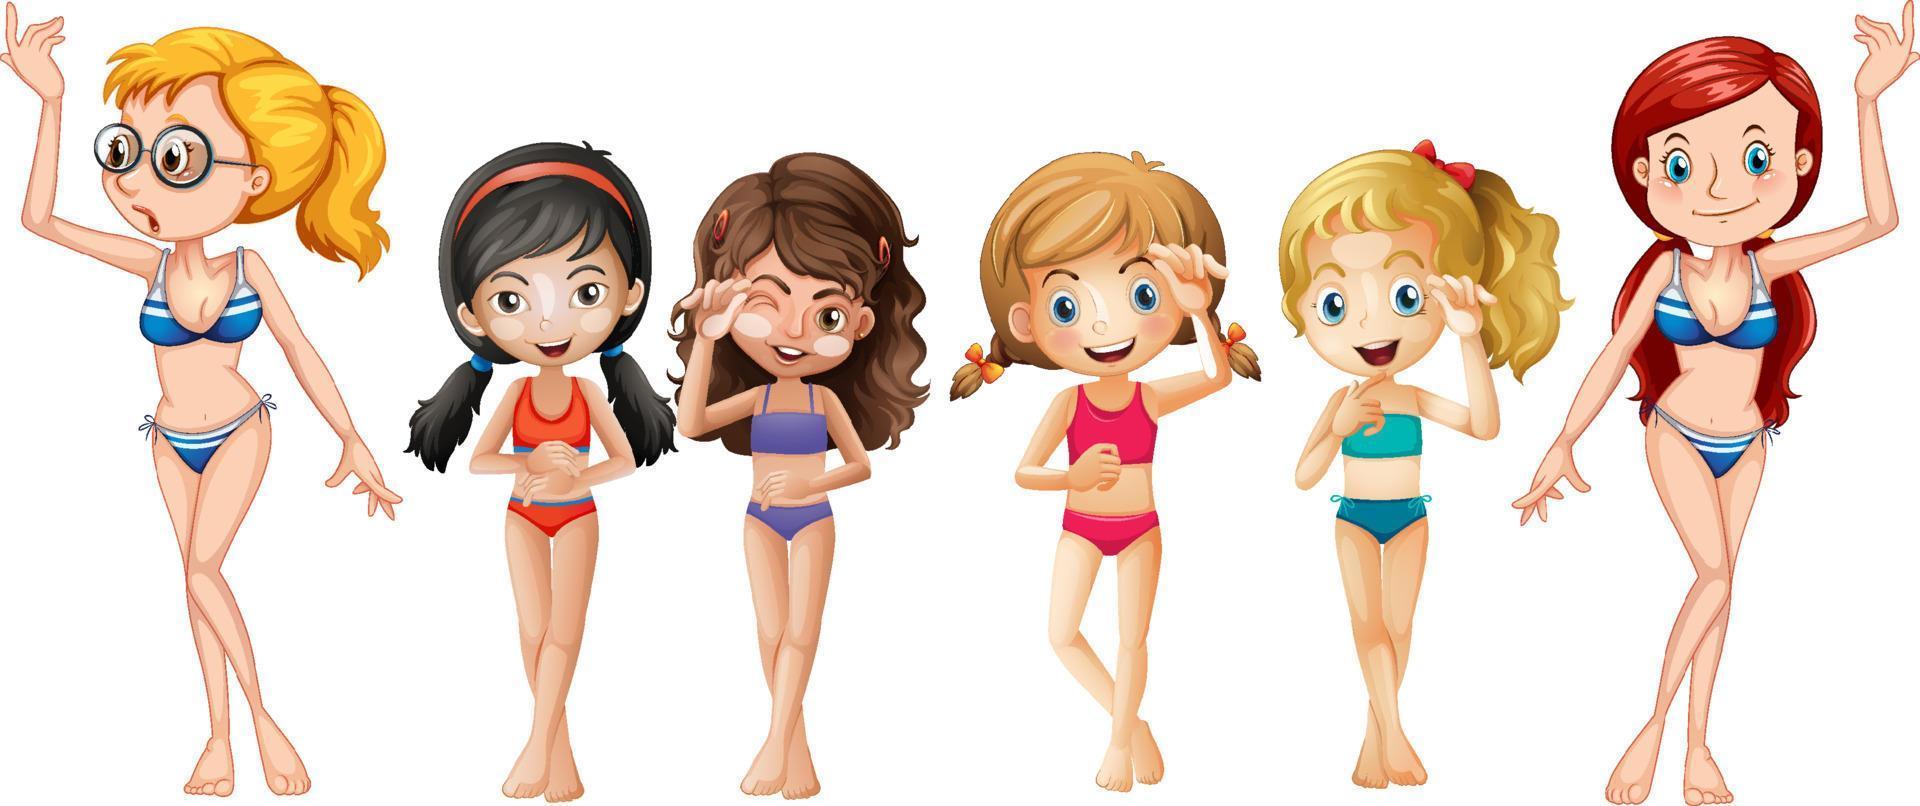 https://static.vecteezy.com/system/resources/previews/004/918/446/non_2x/many-girls-wearing-bikinis-cartoon-characters-free-vector.jpg